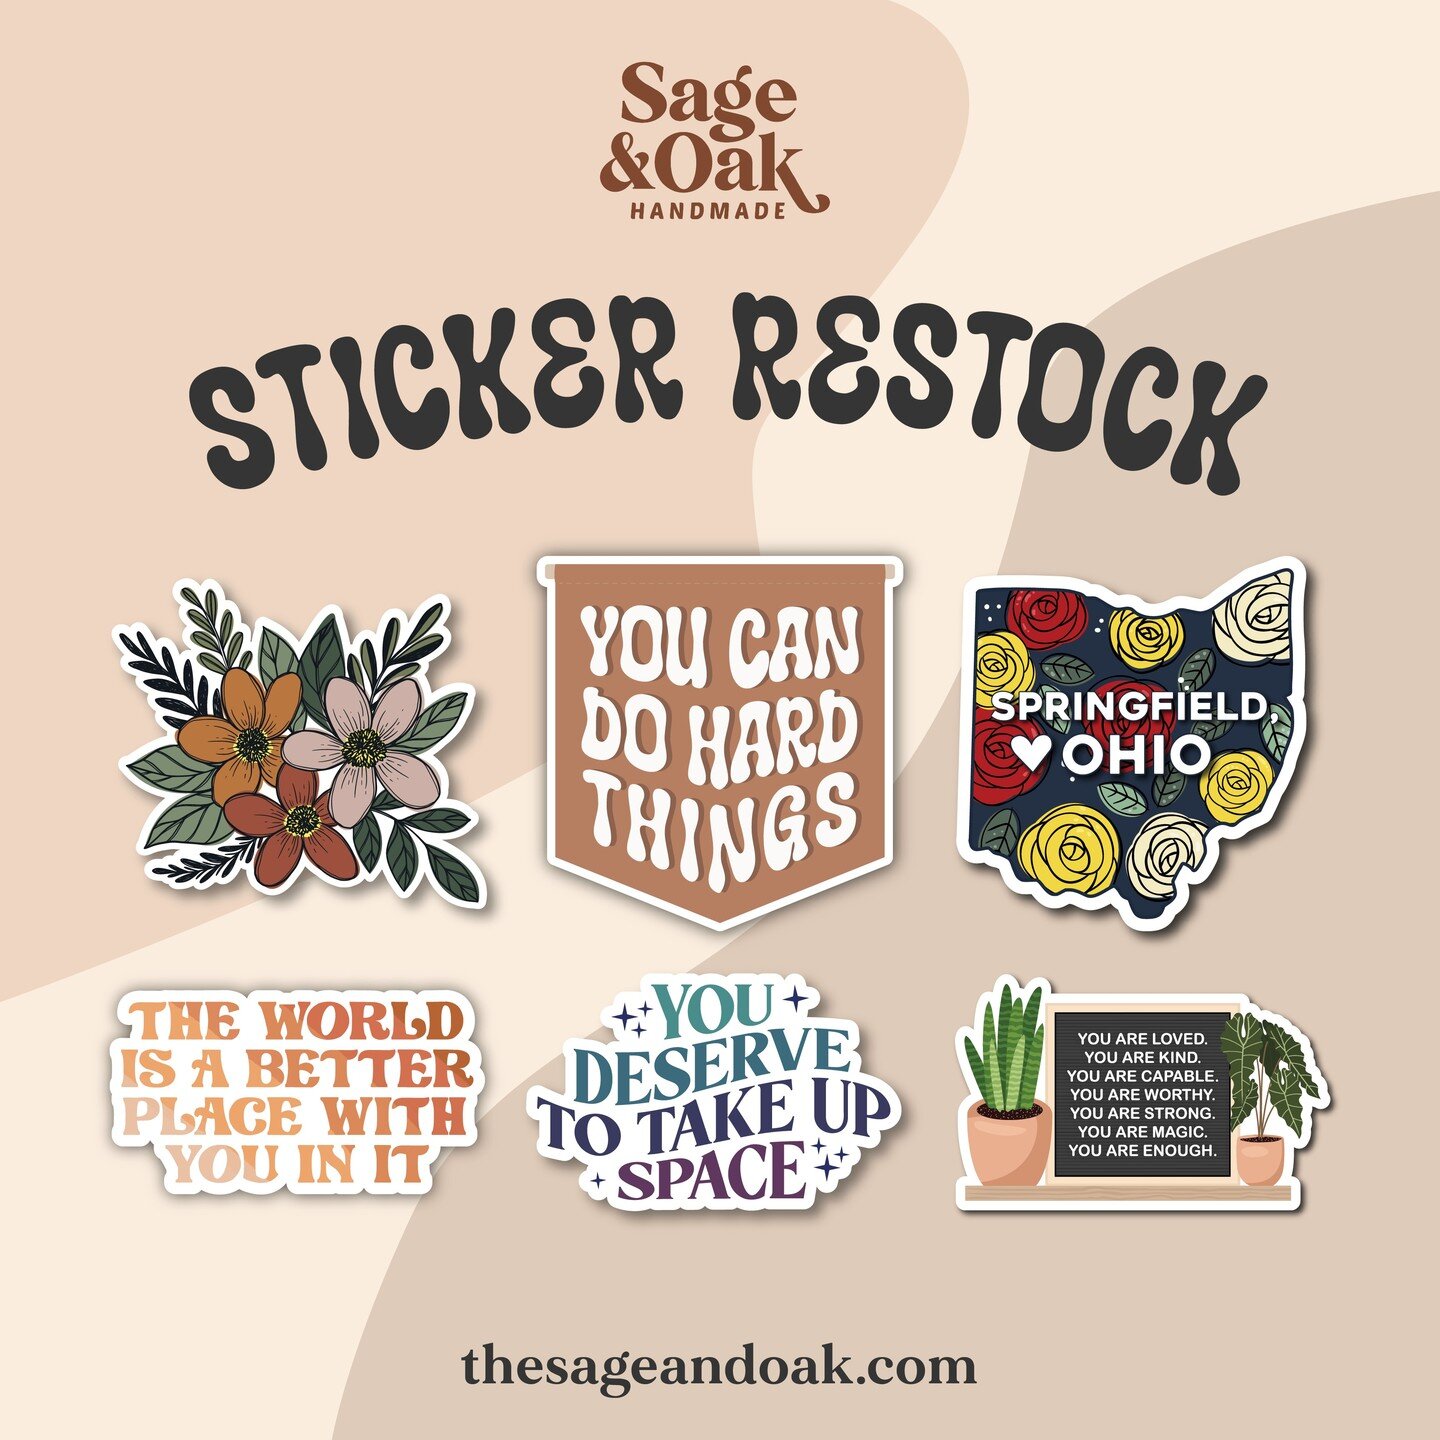 🎉 Happy sticker restock day! 🎉

We've just restocked six of our most popular sticker designs! 🌈✨ Whether you're a fan of houseplants, motivational quotes, or cute illustrations, we've got something special for everyone.

Our 3&quot; stickers are p